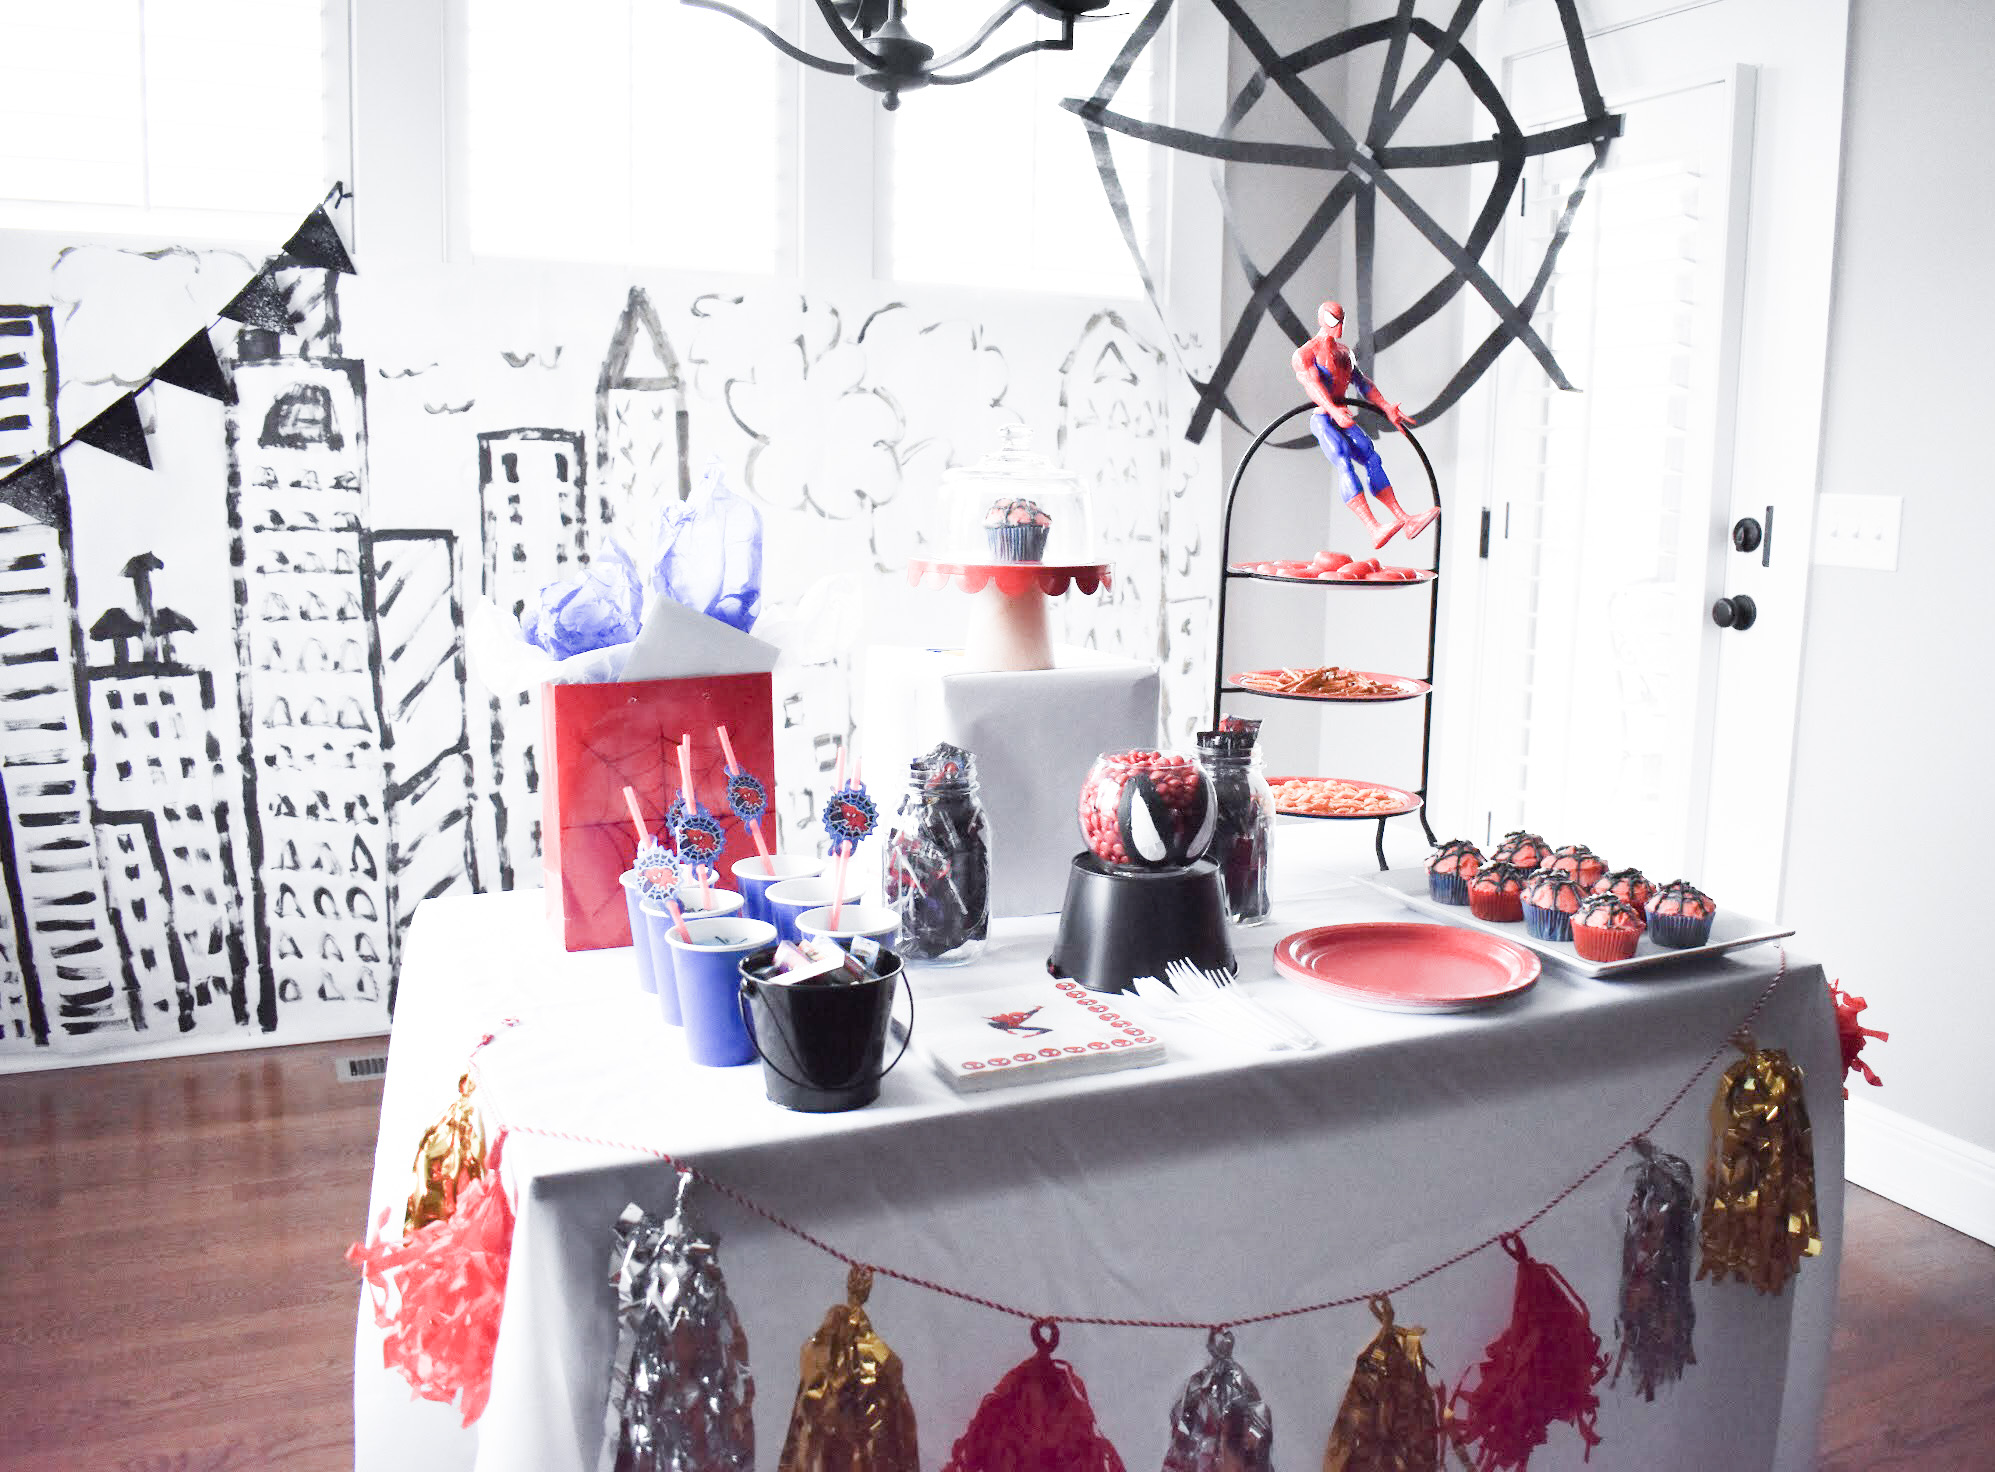 Spiderman Birthday Party - Spider-Man Party Ideas: Looking for Spiderman birthday party ideas? I pulled together some of my favorite Spider-Man birthday party ideas to create this classy Spiderman party for my favorite 3-year-old! #BirthdayParty #PartyIdeas #Spiderman #Spider-Man